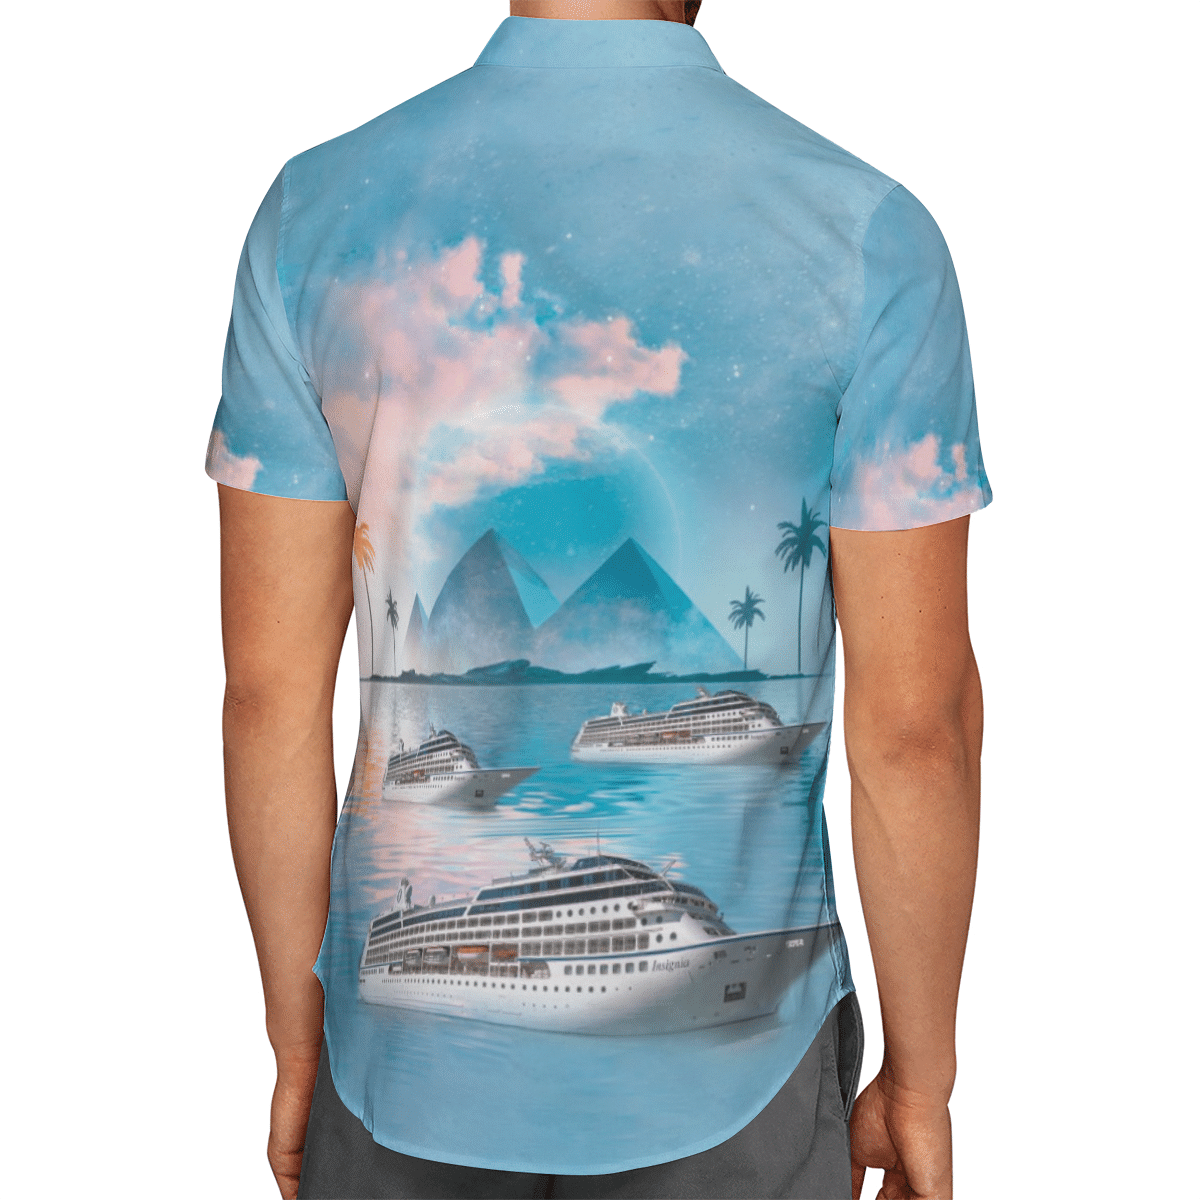 Going to the beach with a quality shirt 28